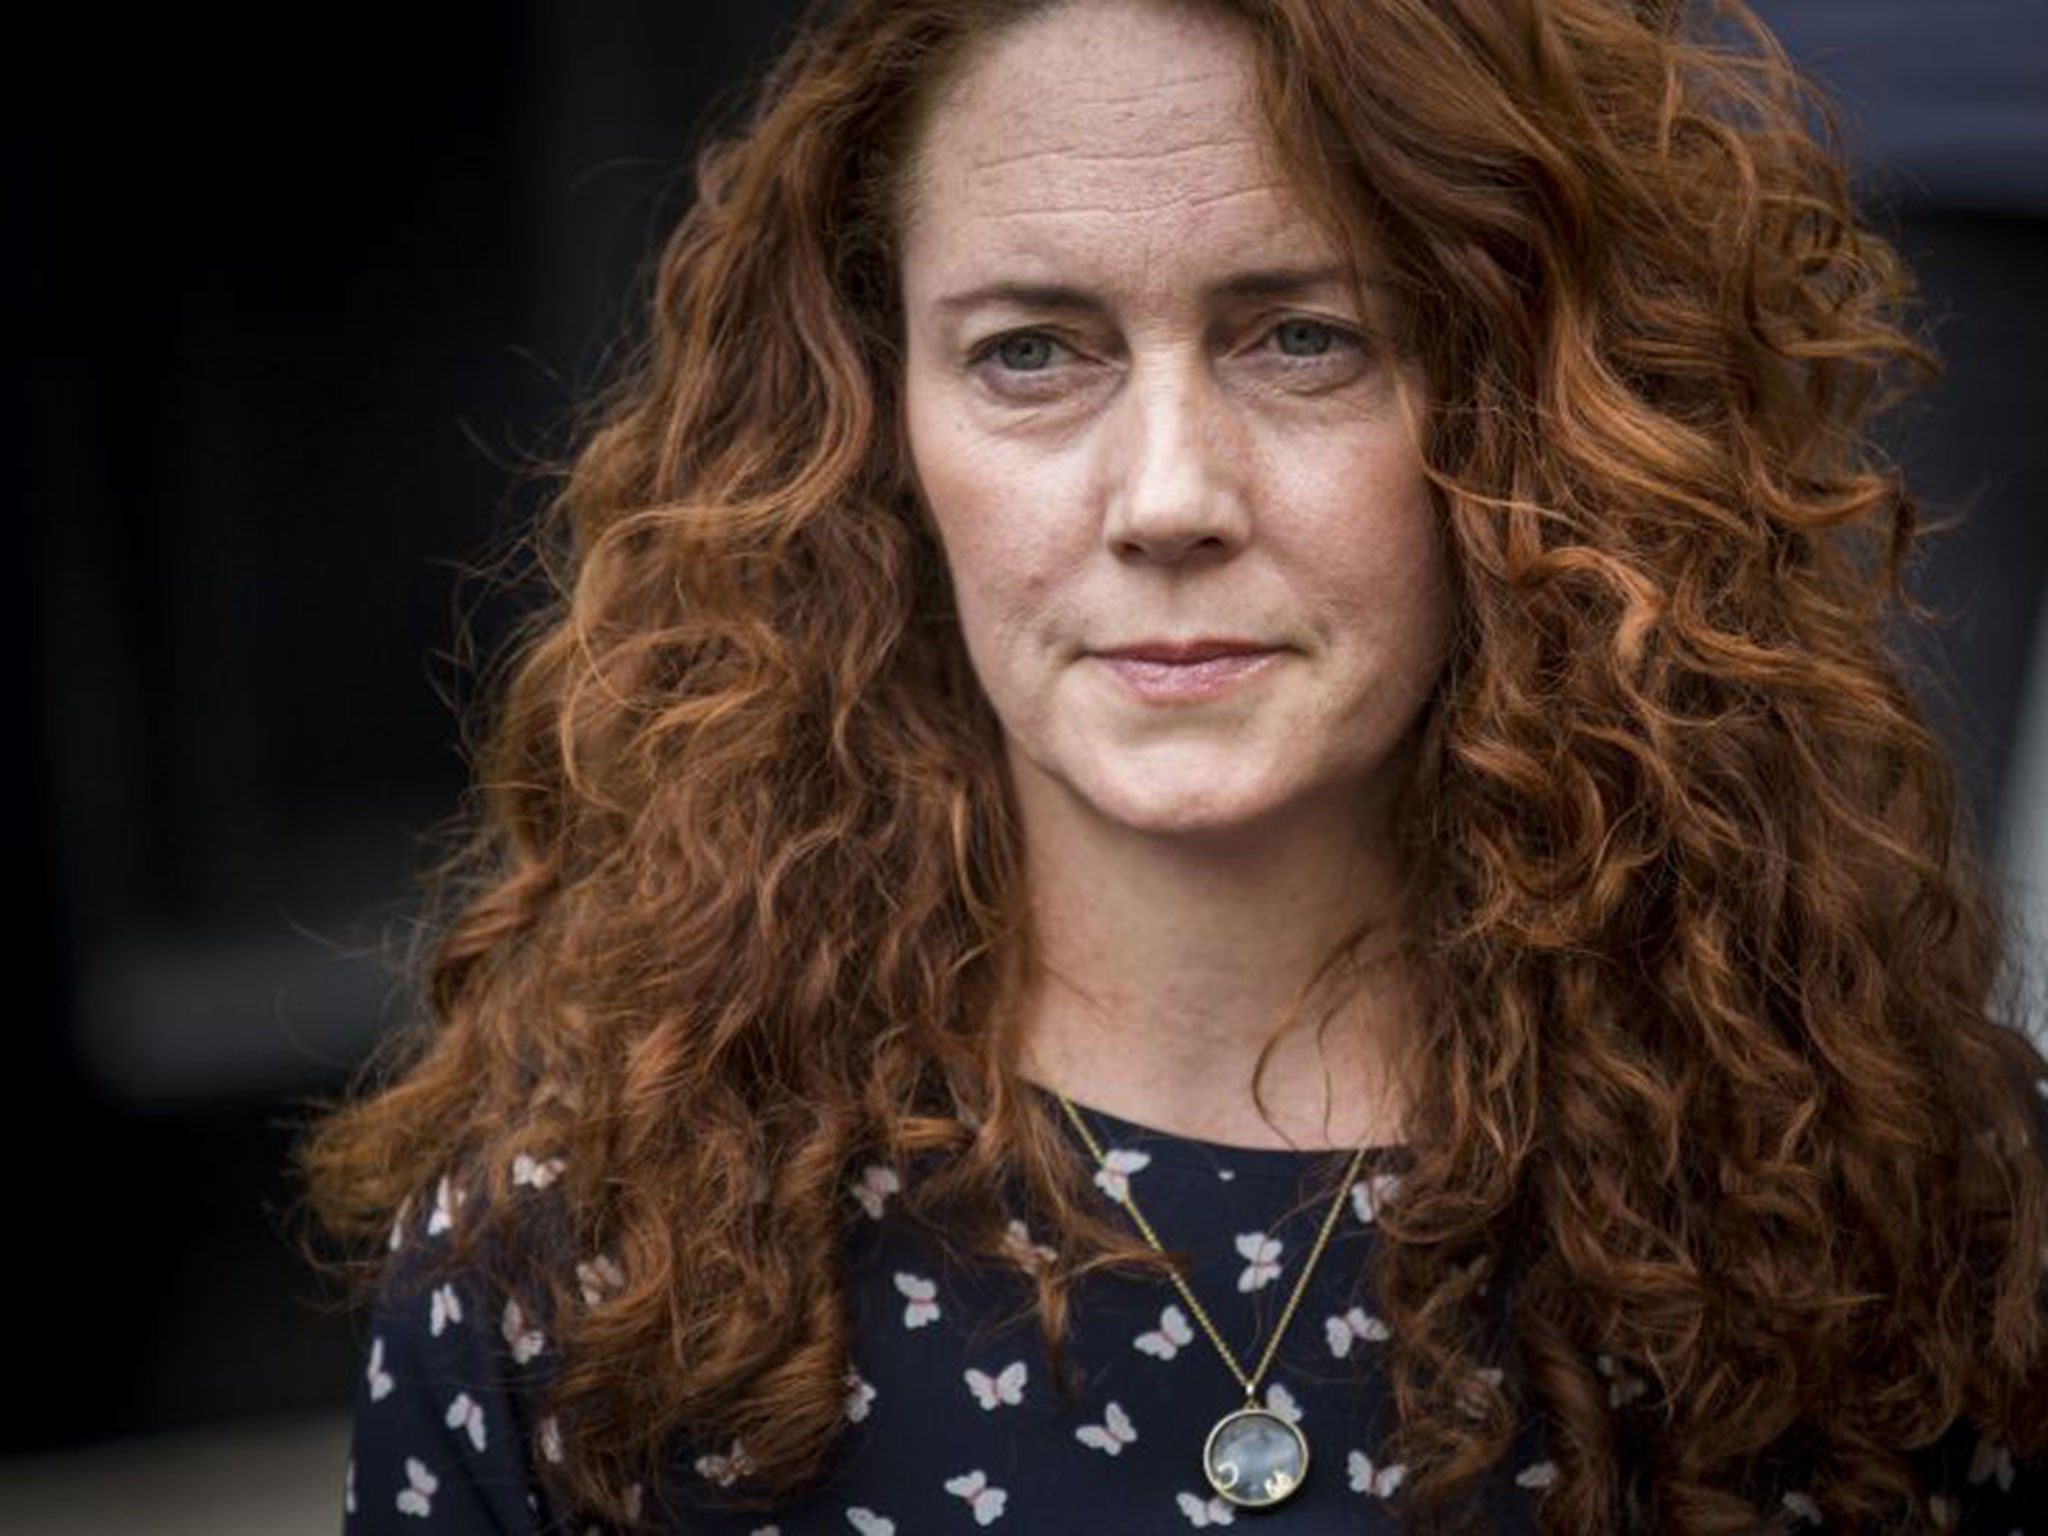 There has been much speculation about the future of Rebekah Brooks since she was cleared in the phone-hacking trial eight months ago